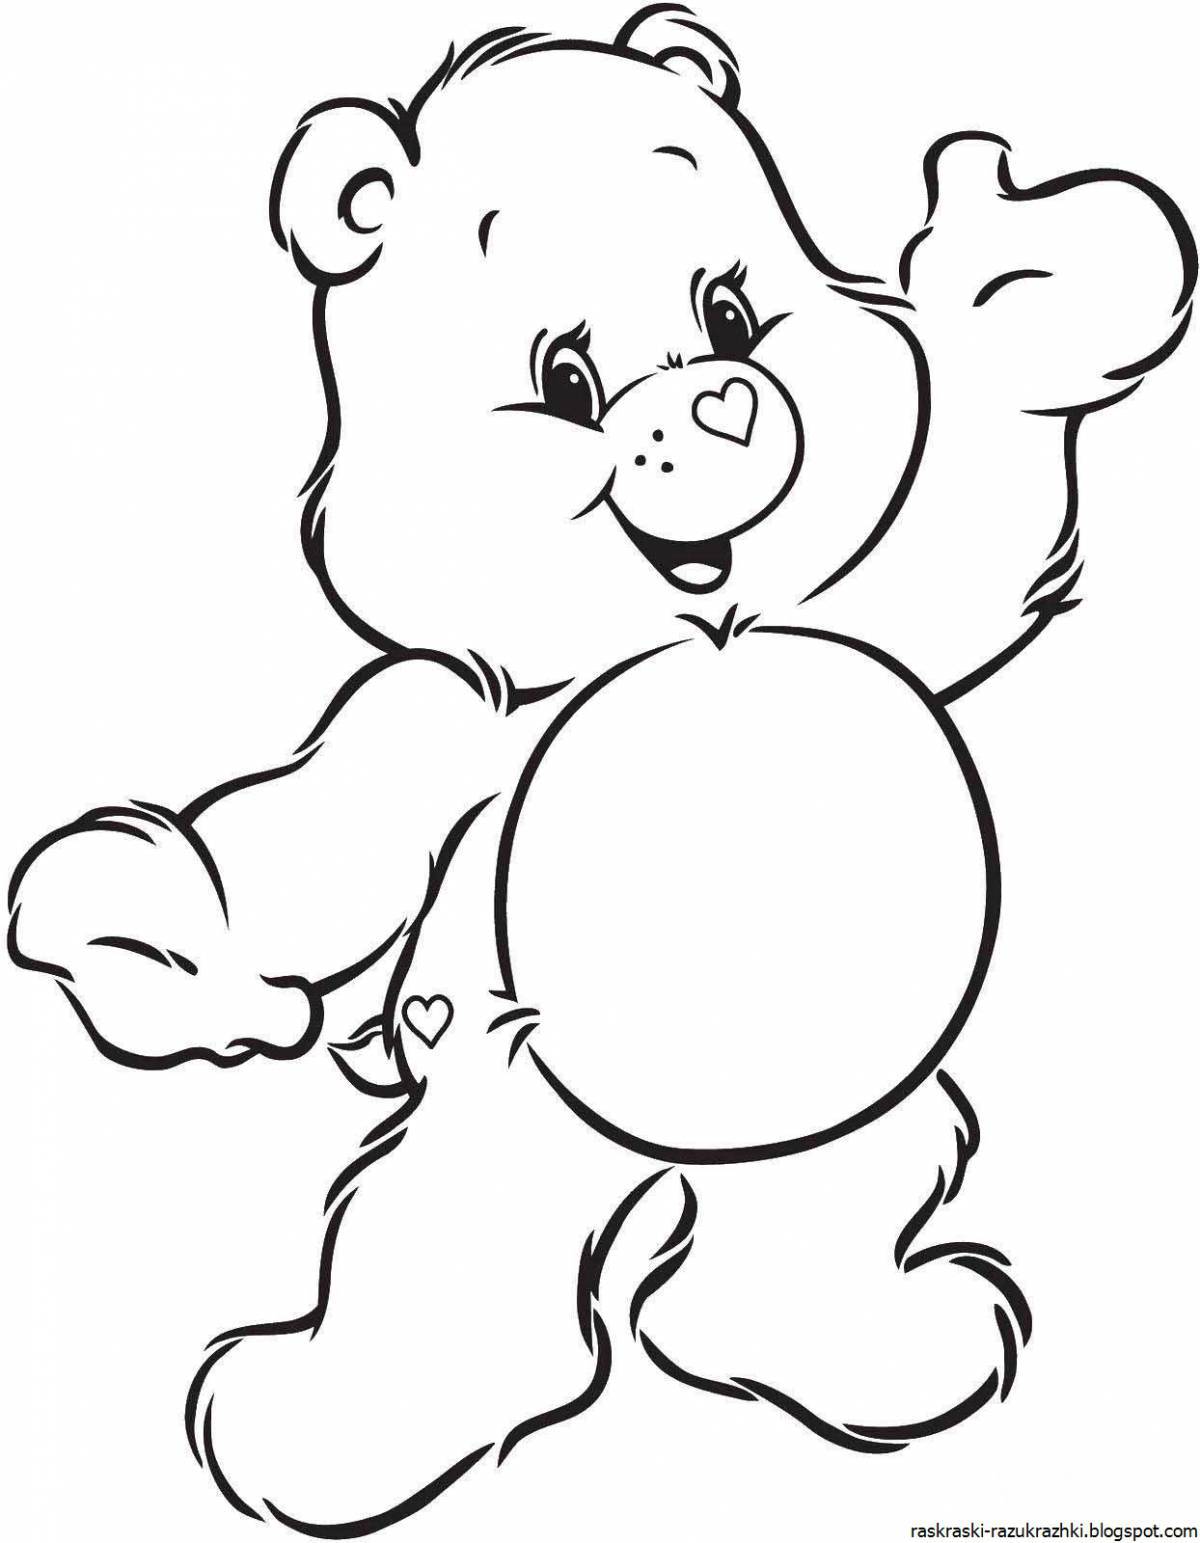 Colouring friendly bear for kids